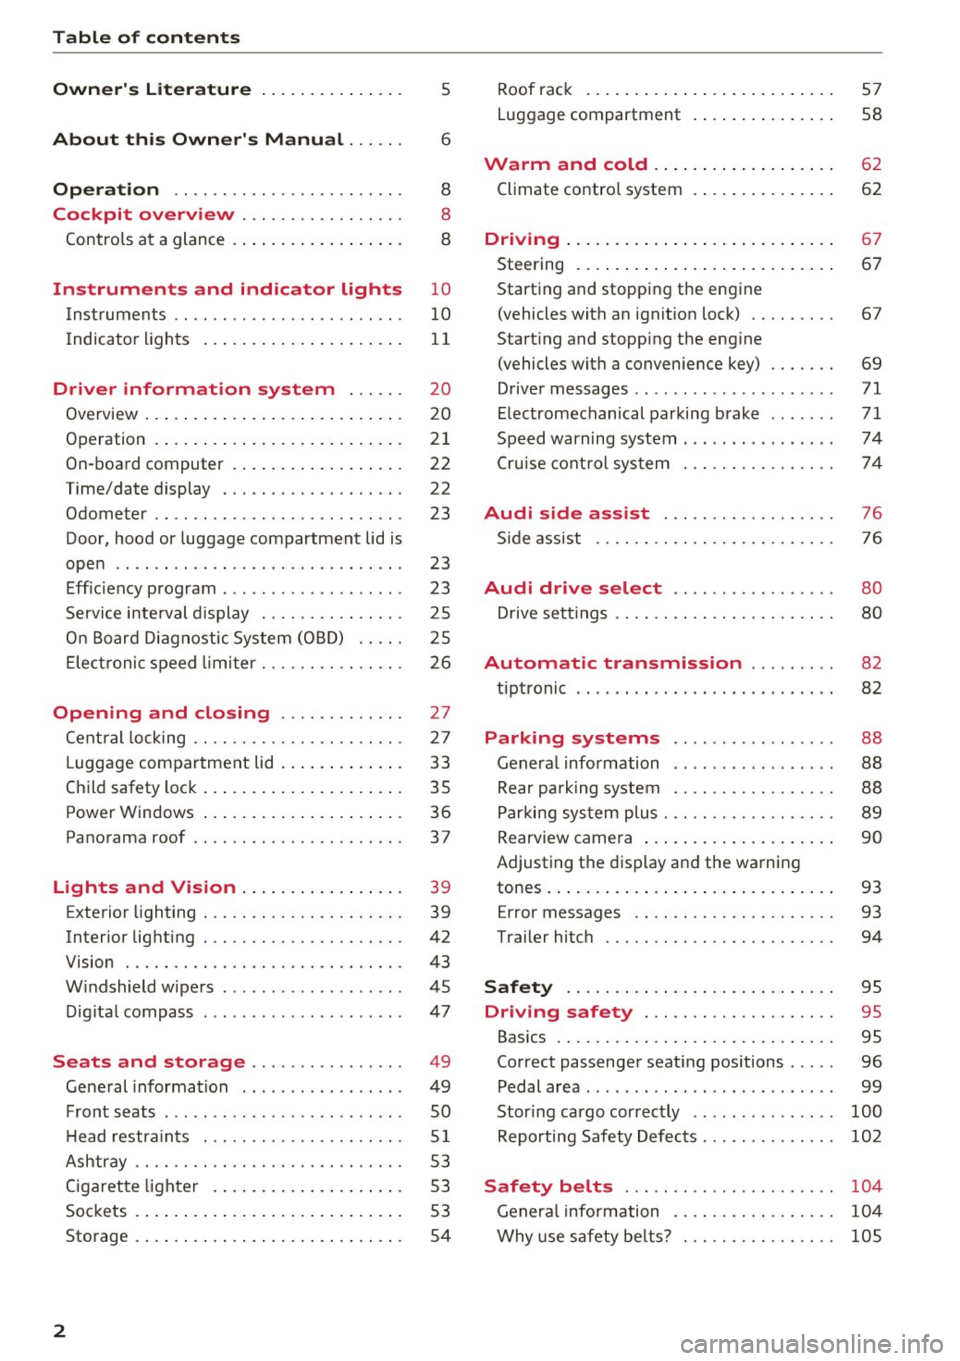 AUDI Q3 2016  Owners Manual Table of  content s 
Owner s Lit e rature 
5 
About  this  Own ers  Manual . . .  . . . 6 
Opera tion  . .  . . . .  . . . . . . . . . . .  . . . .  . . . 8 
Cockpit  overview  . . . . . . . . . . .